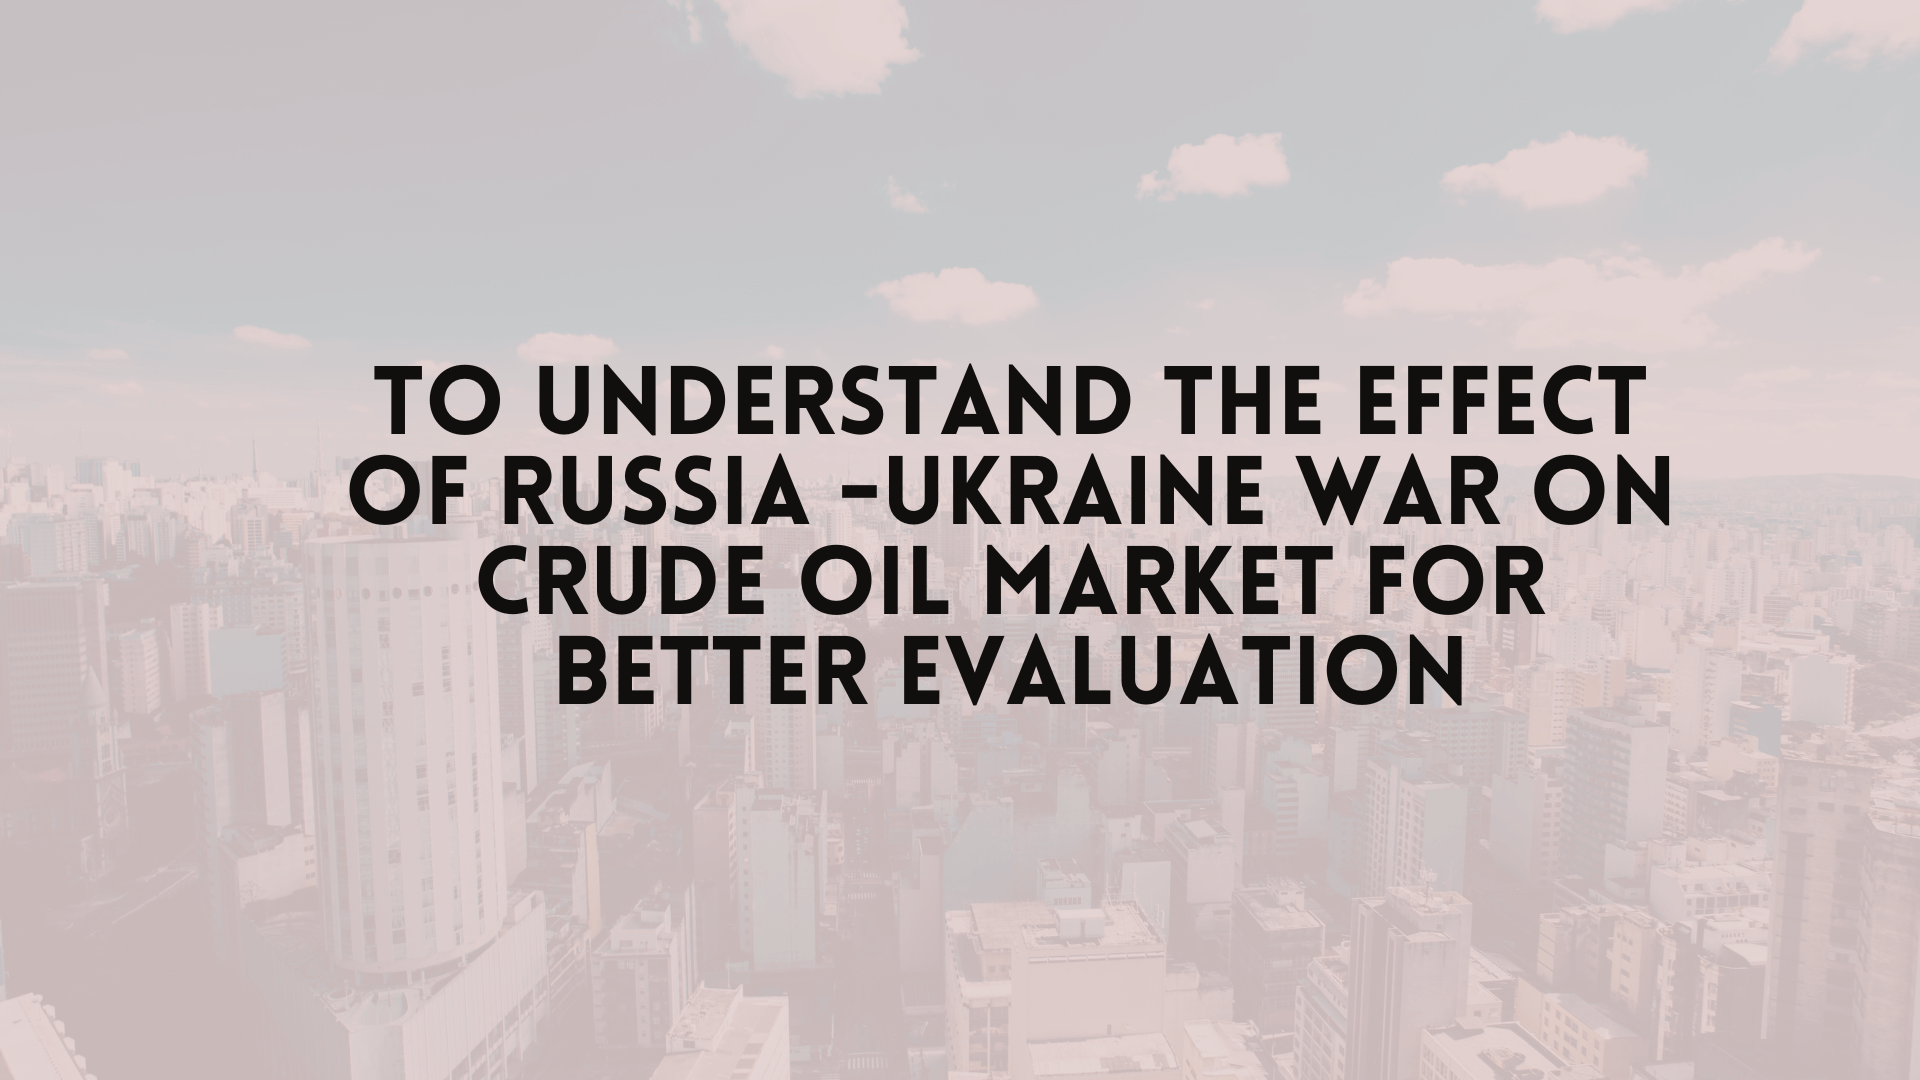 To Understand the Effect of Russia -Ukraine War on crude oil market for better evaluation